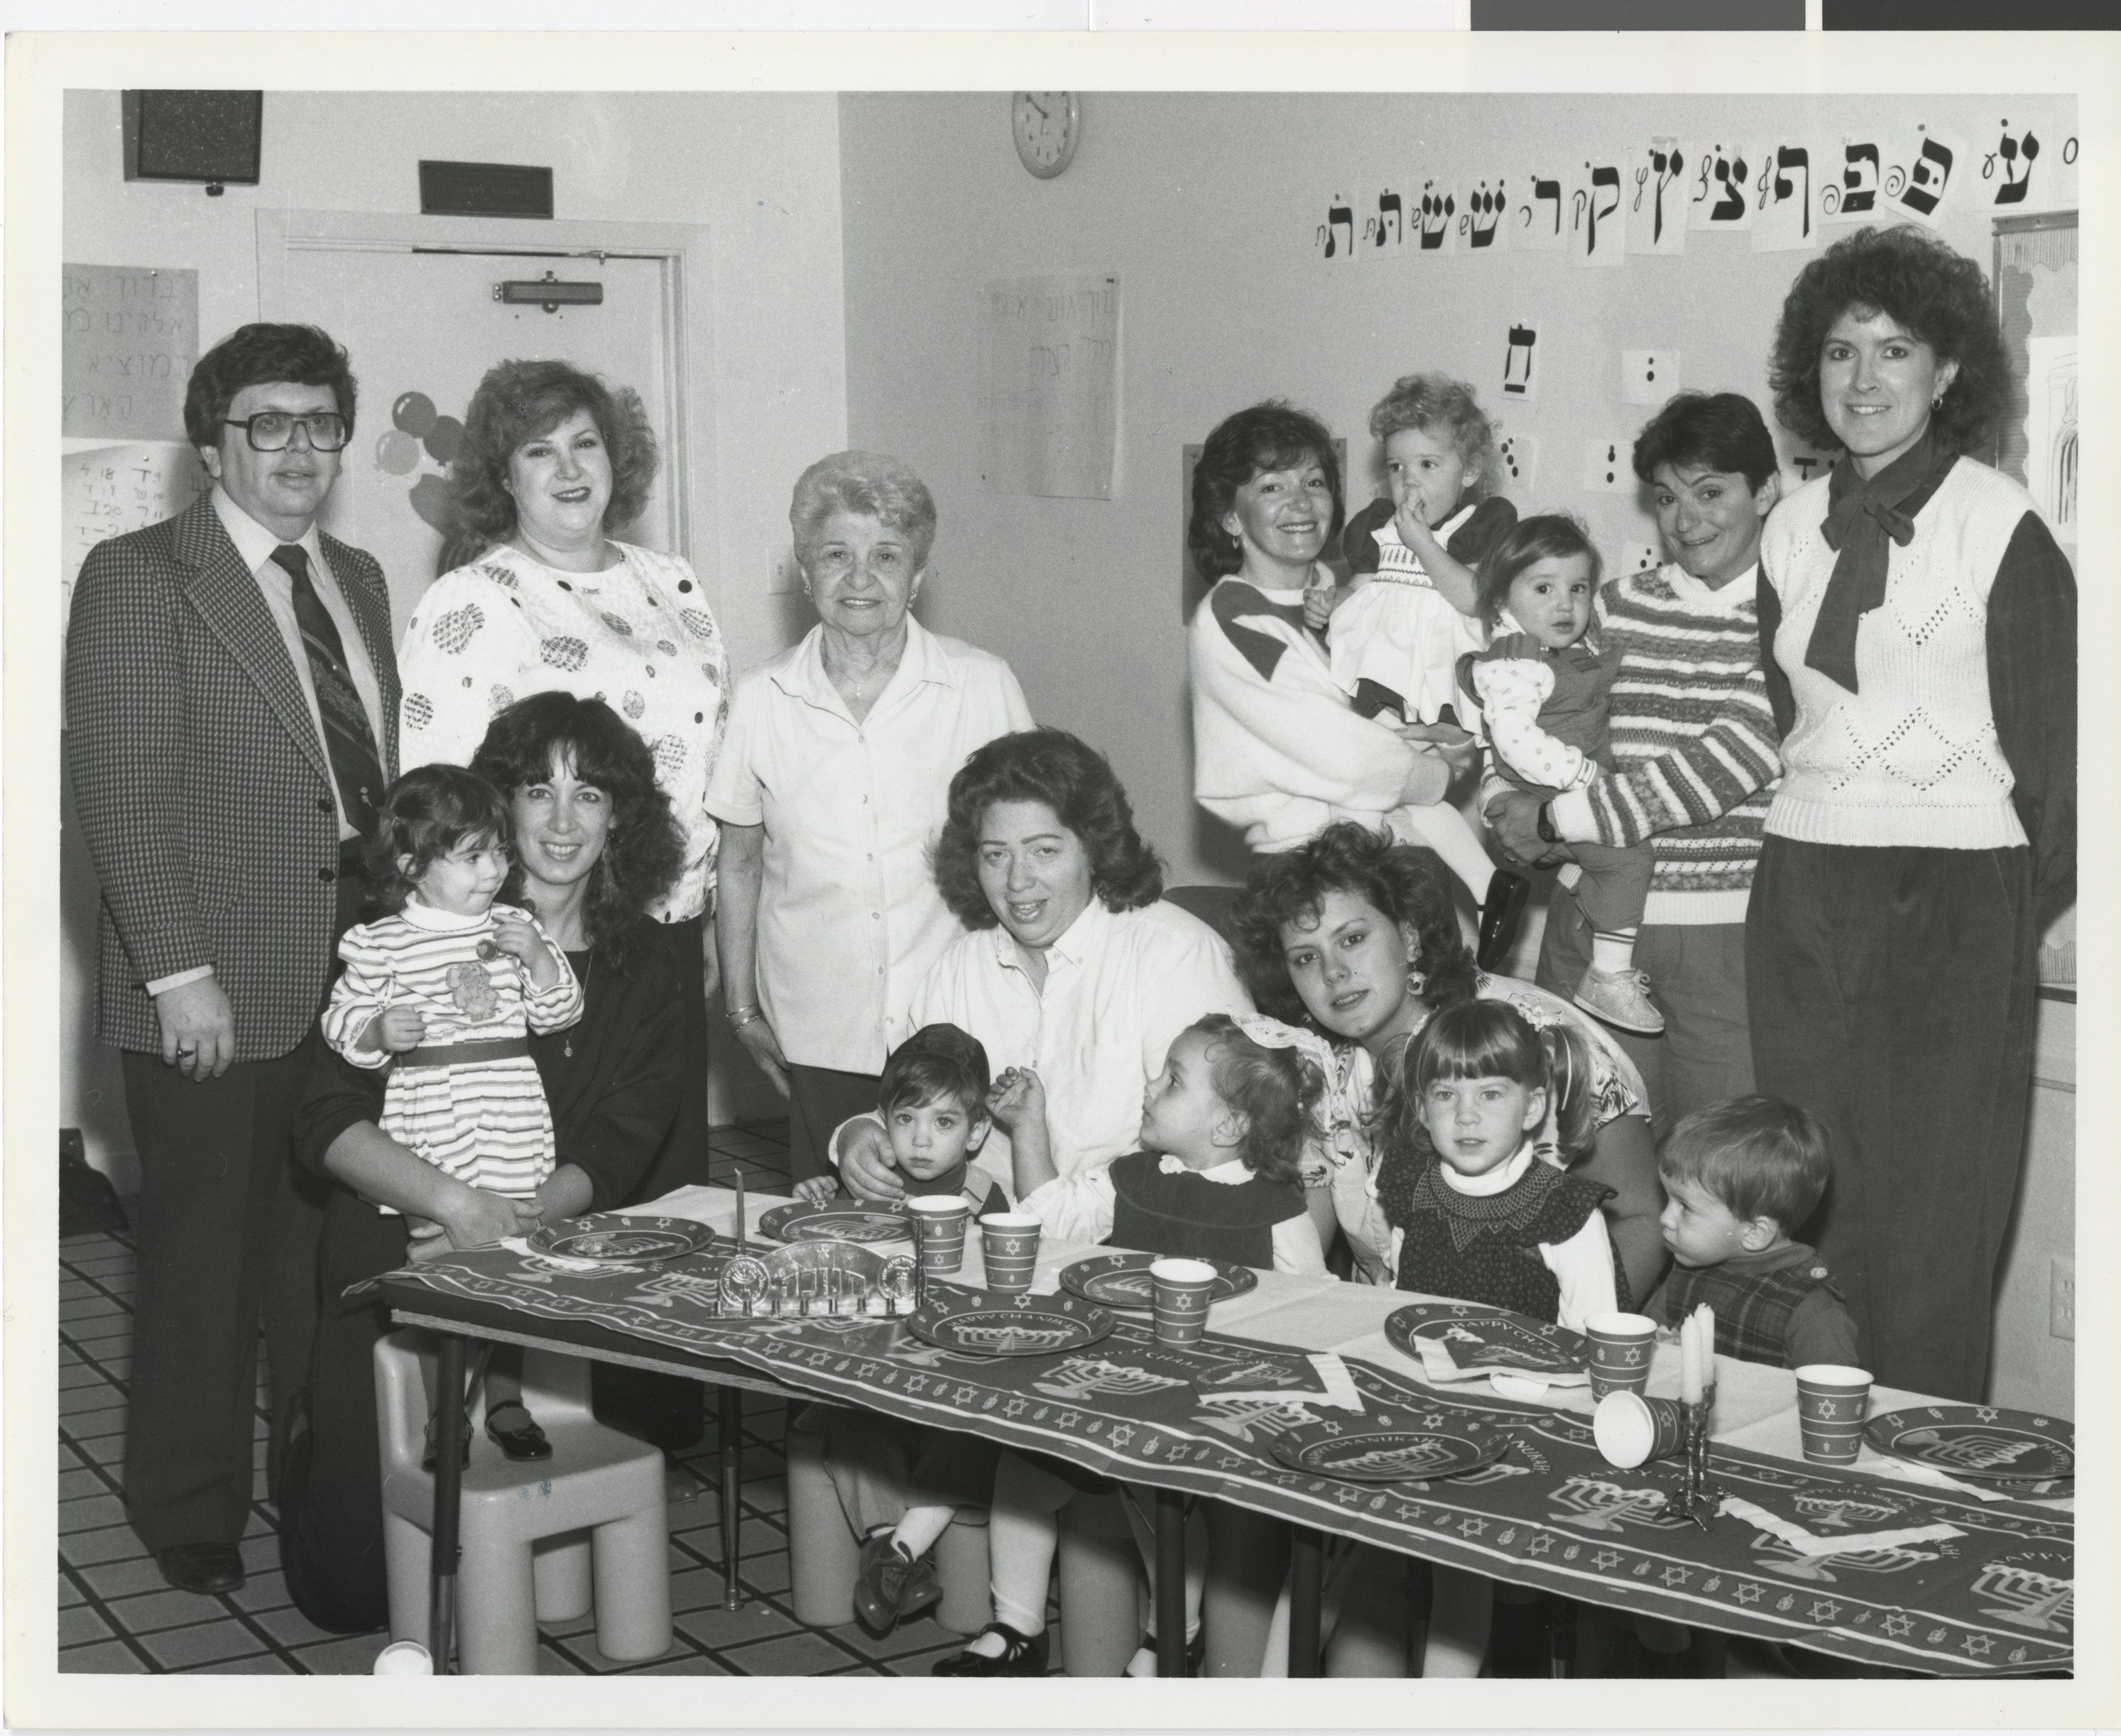 Photograph of Chanukah party, 1980s